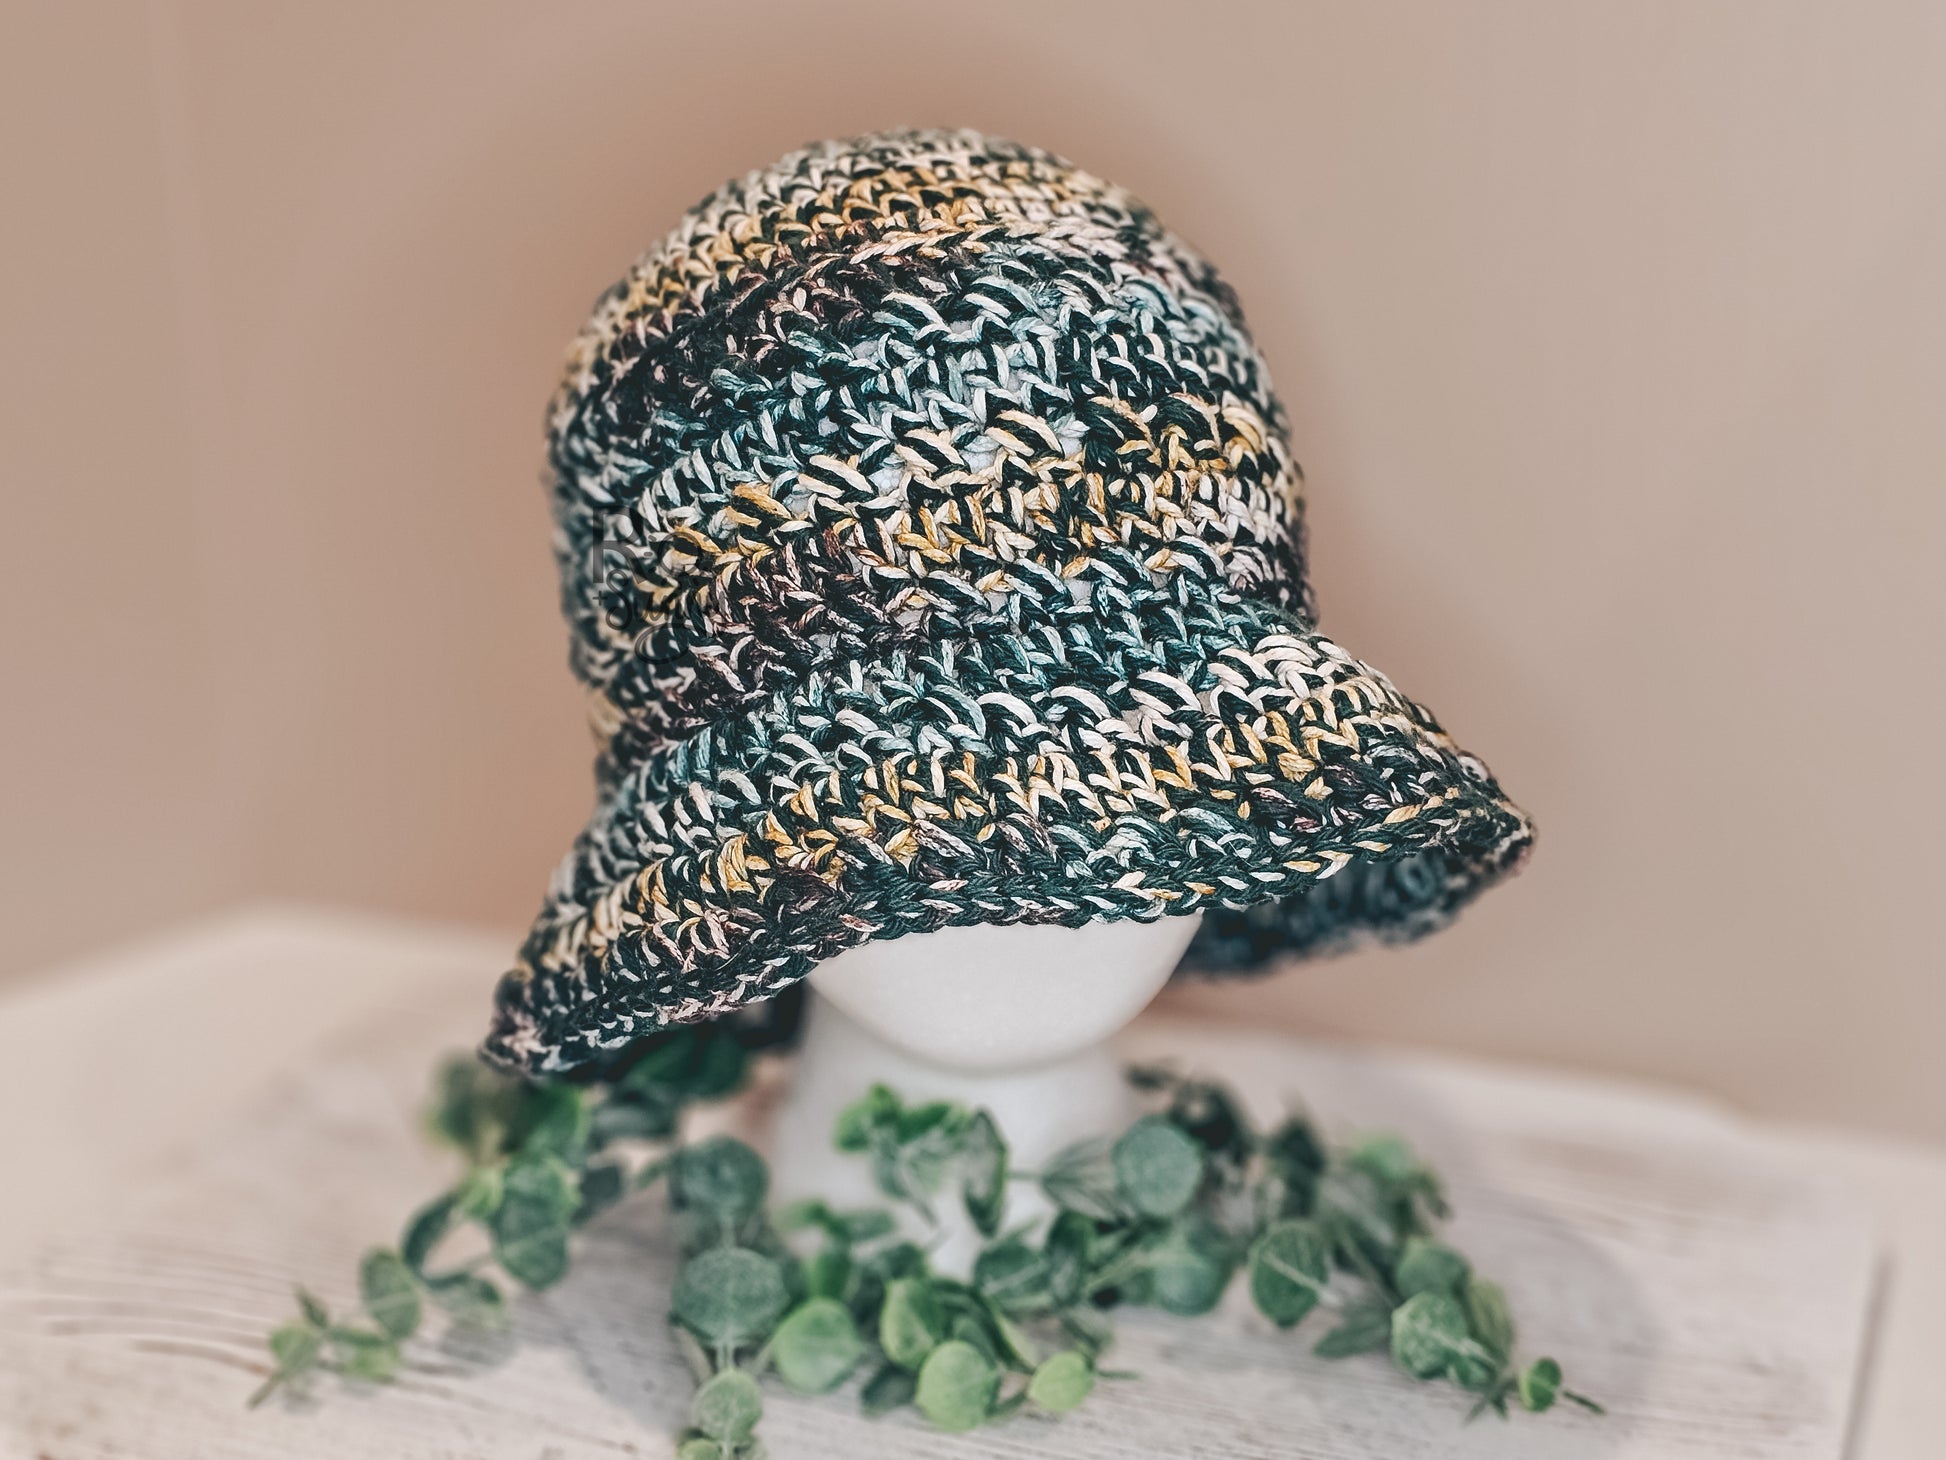 Bucket Hat in color Willamette Valley -  Dark Green Base with highlights of Yellow, White, Brown.